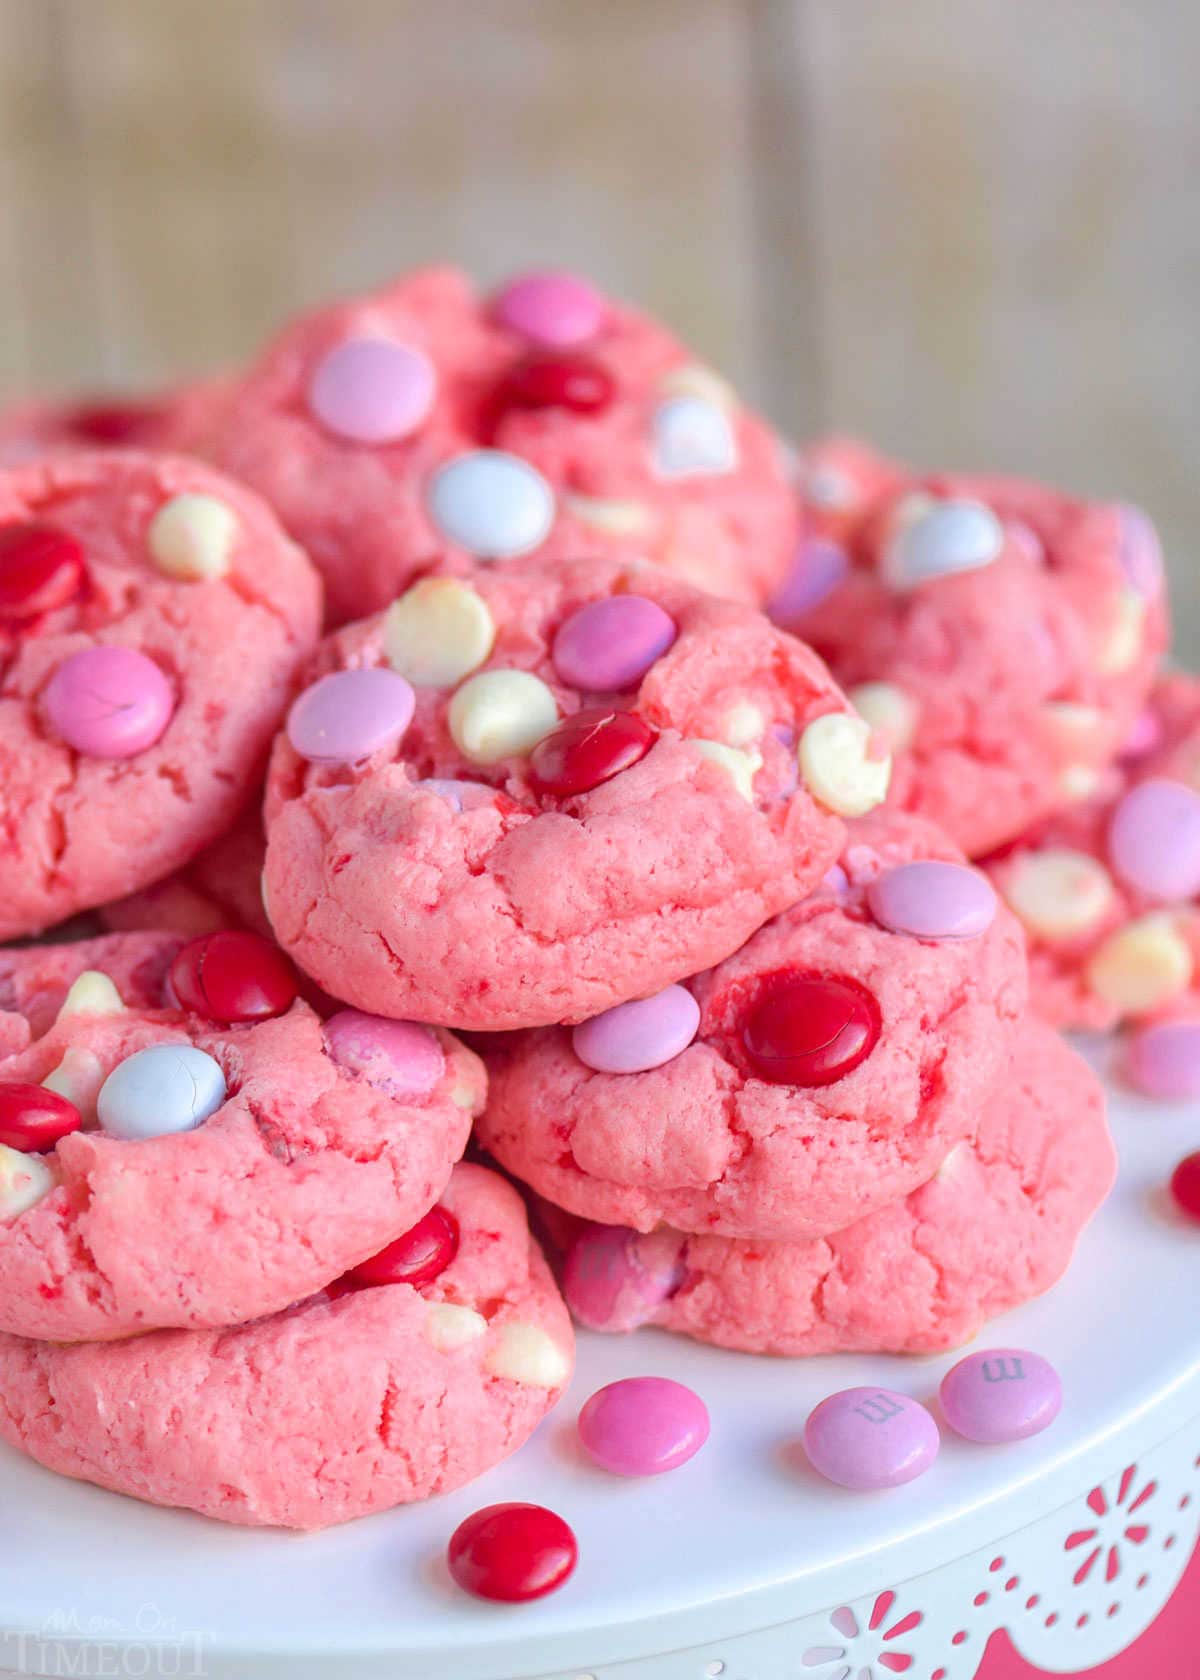 strawberry cake mix cookies made with M and Ms and white chocolate chips piled high on a white metal cake stand.